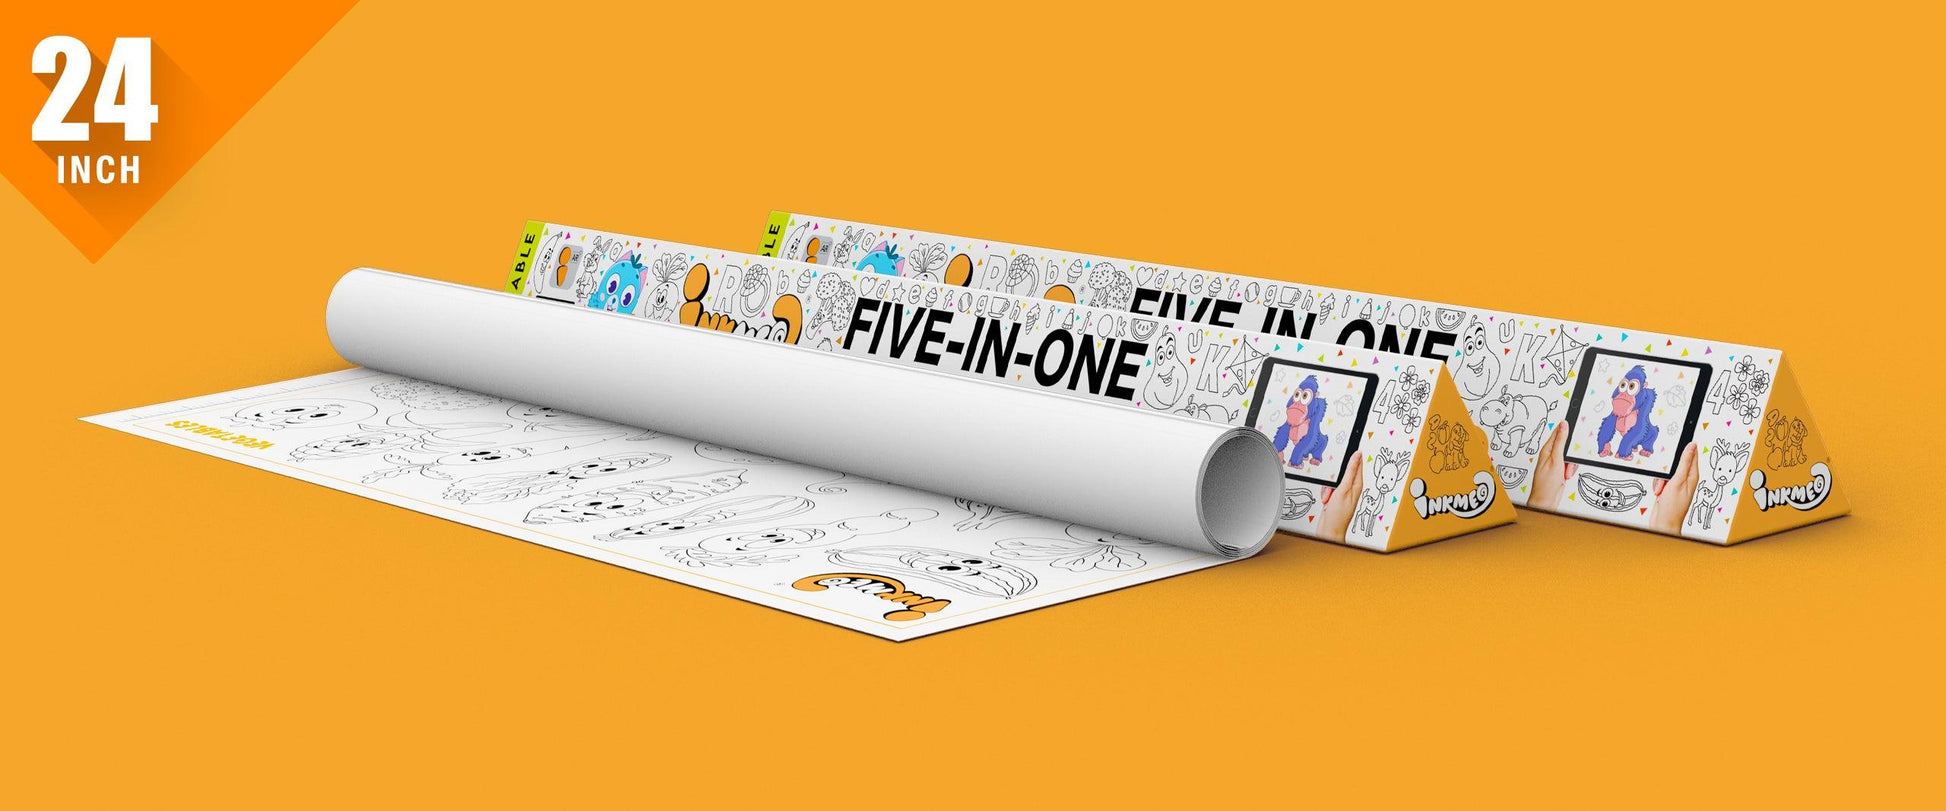 Five in One Colouring Roll ( 24 inch) - Inkmeo